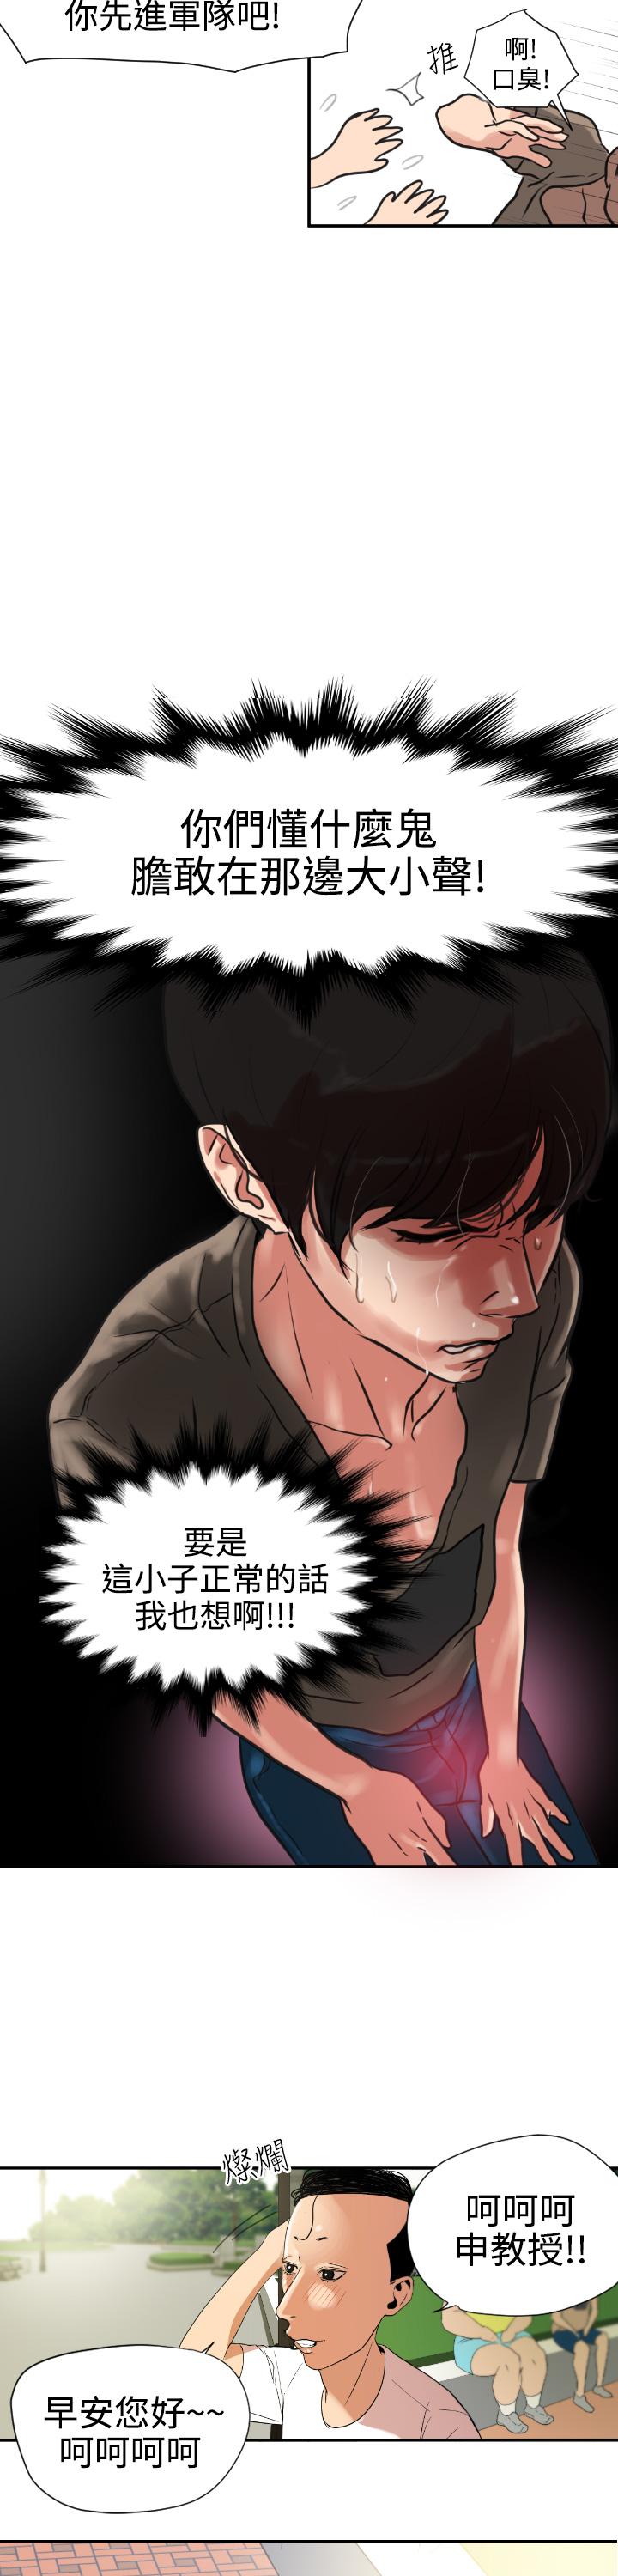 Desire King (慾求王) Ch.1-12 (chinese) 13